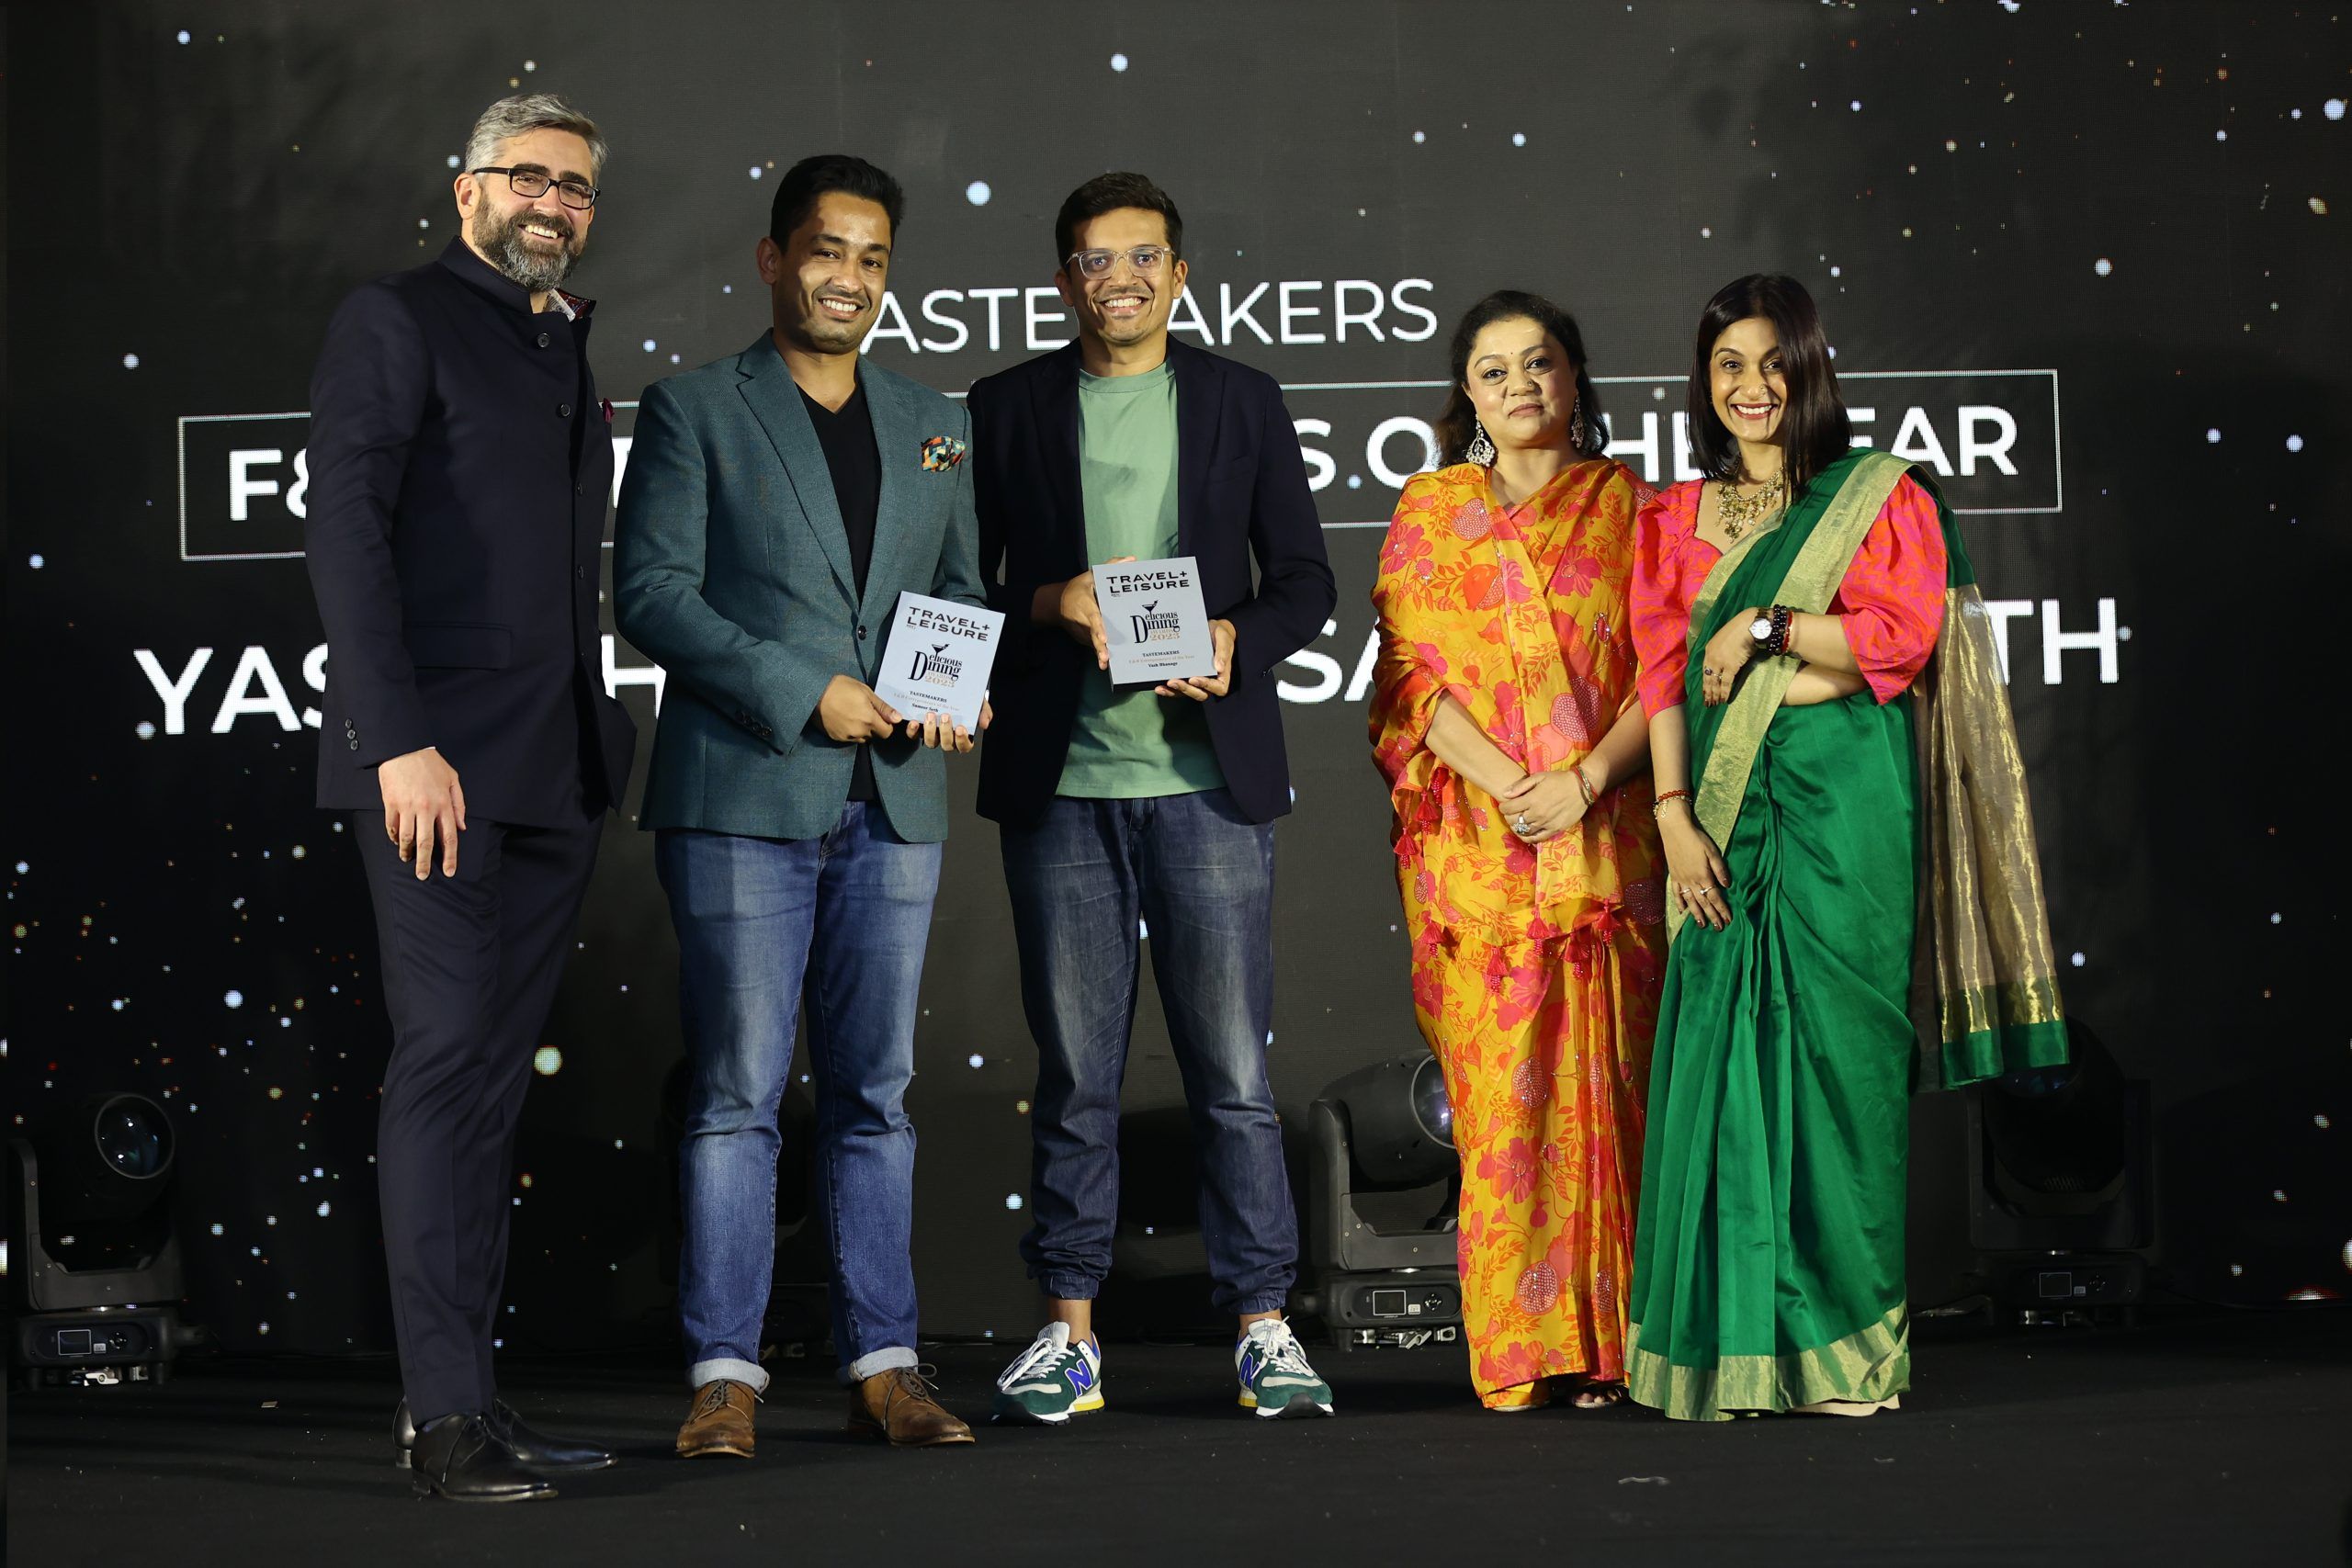 T+L Tastemakers - F&B Entrepreneurs of the Year. Yash Bhanage and Sameer Seth